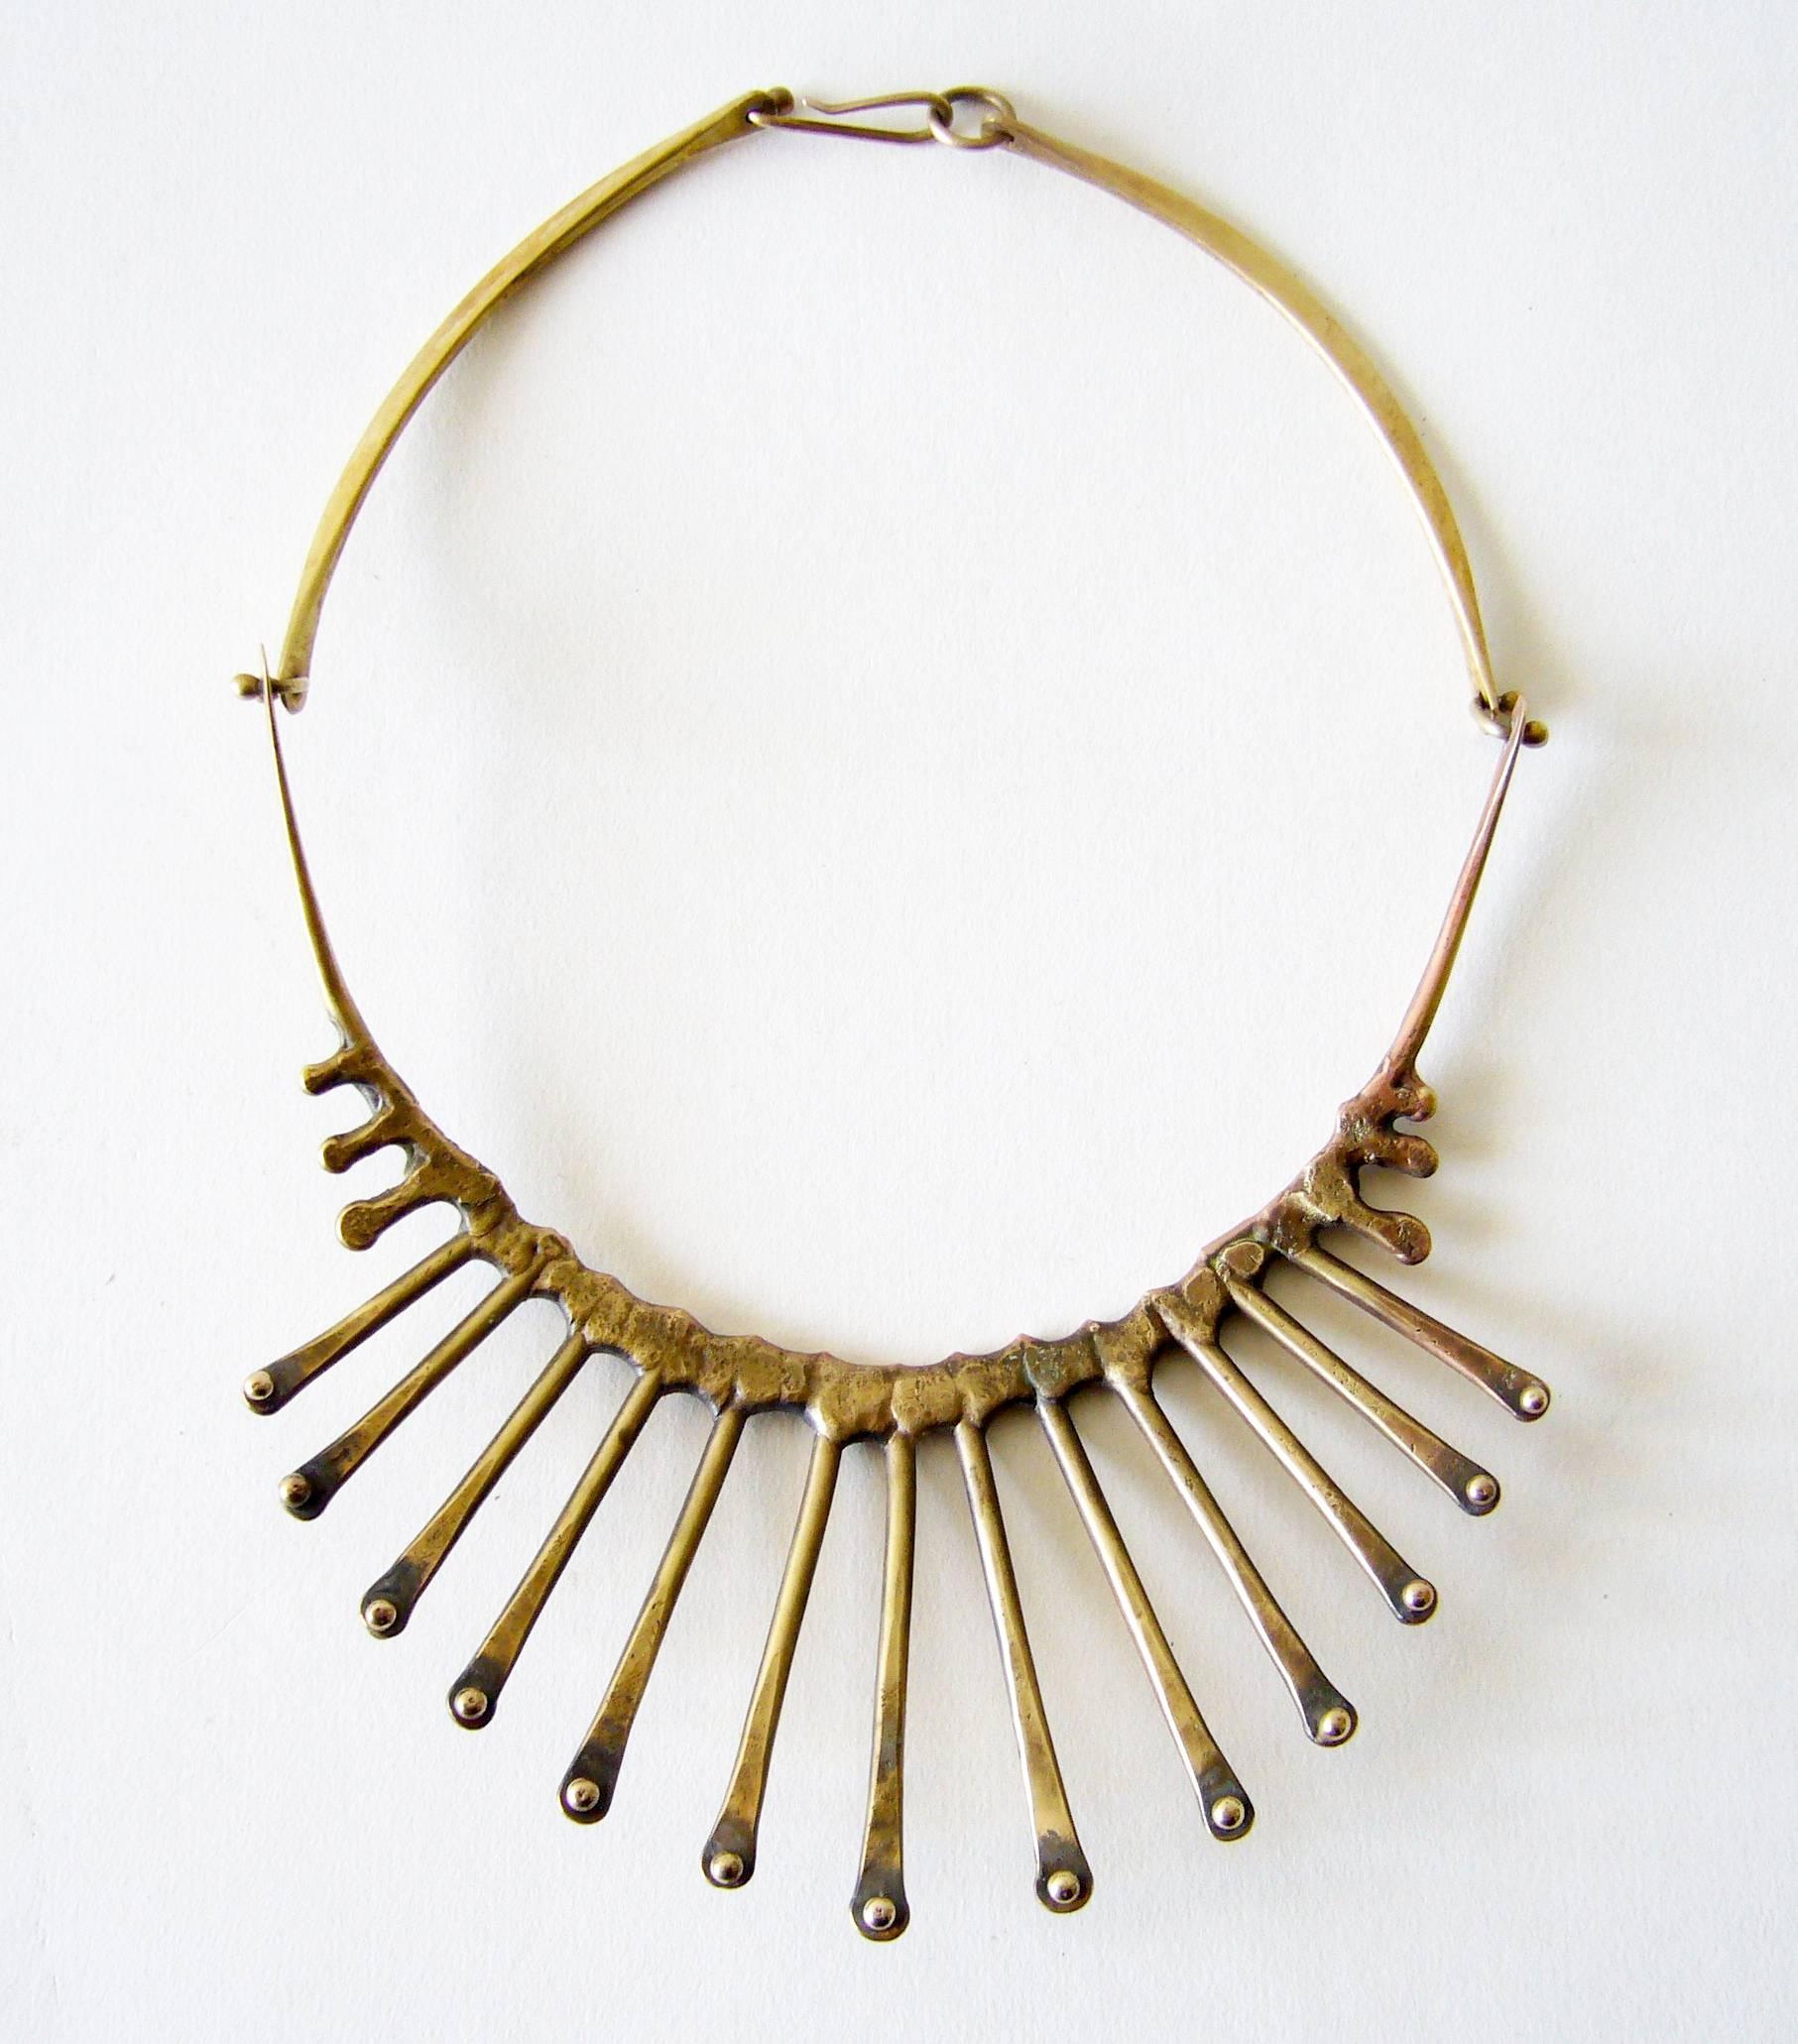 Hand forged bronze studded spike necklace created by Jack Boyd of San Diego, California.  Necklace has a wearable neck length of 17.5